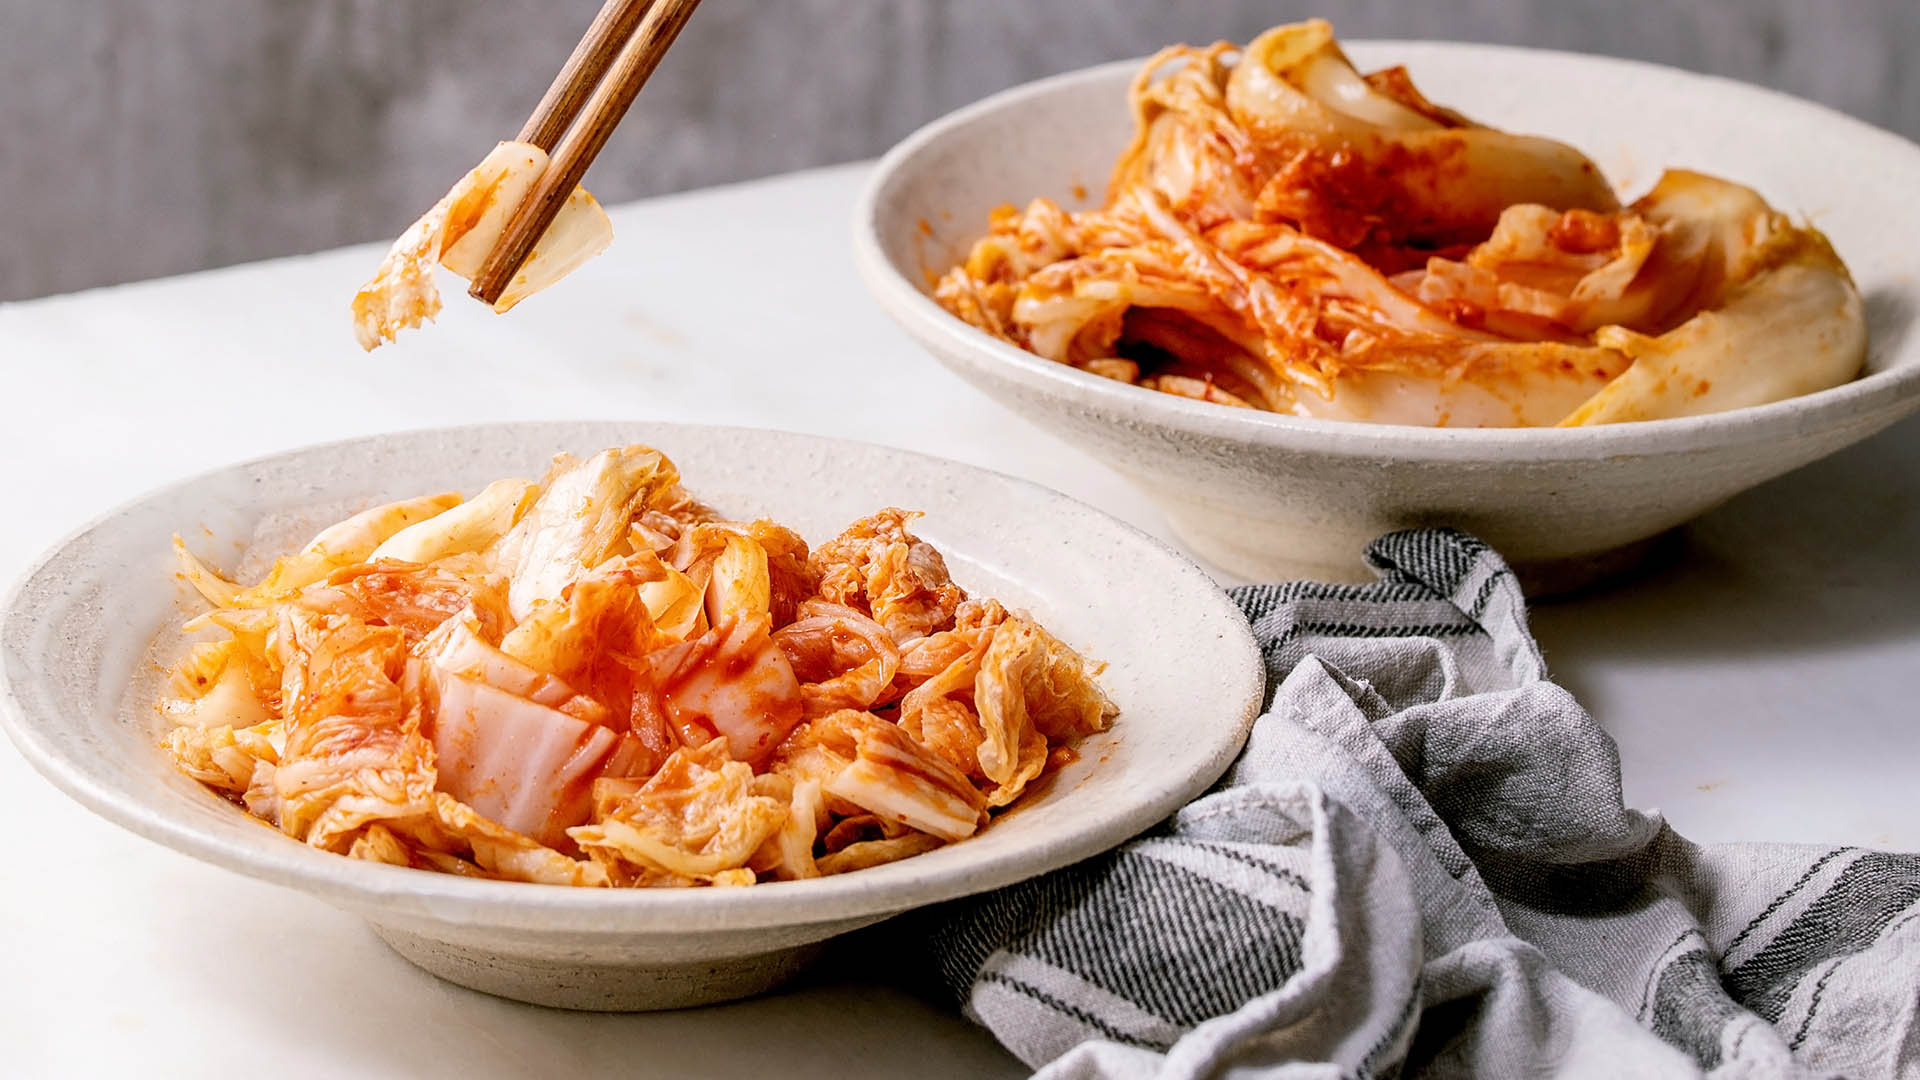 <p>One study found fermented kimchi to be beneficial in a group of people with pre-diabetes, even compared to those who ate fresh kimchi. Another study found consuming fermented kimchi reduced body weight and boosted the metabolism in overweight and obese people.</p>